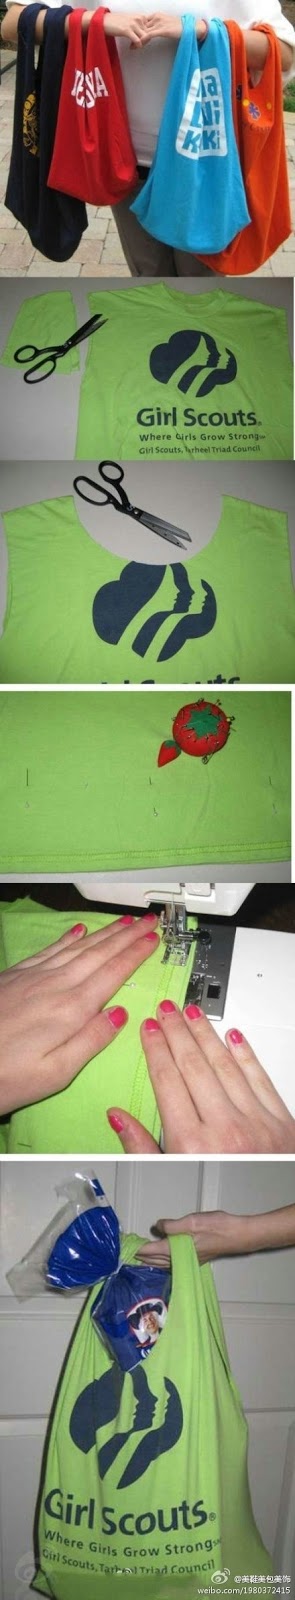 FUN AND FASHION HUB: Recycling of old t-shirts by making reusable bags